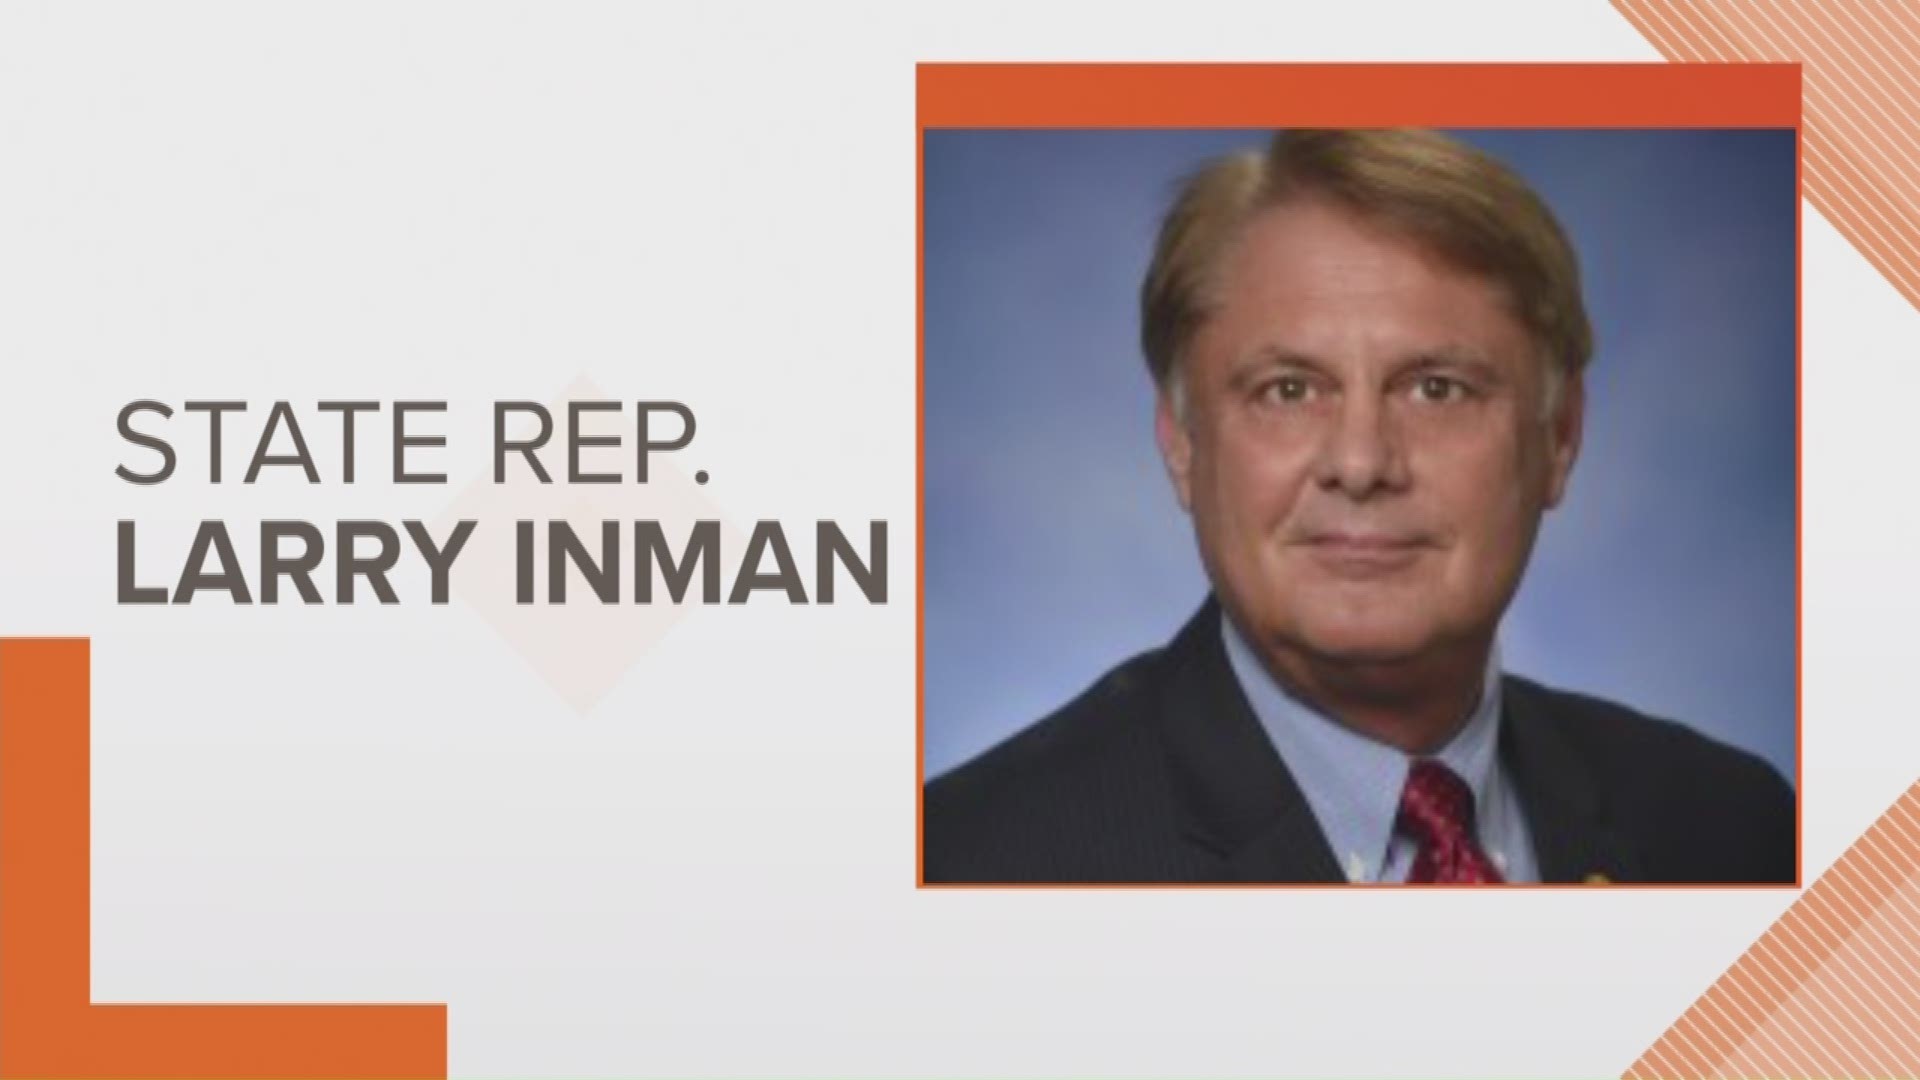 Republican Rep. Larry Inman was indicted Tuesday on charges of attempted extortion, soliciting a bribe and lying to the FBI. The retired banker is serving his third term in the House after decades as a local elected official in the Traverse City area.